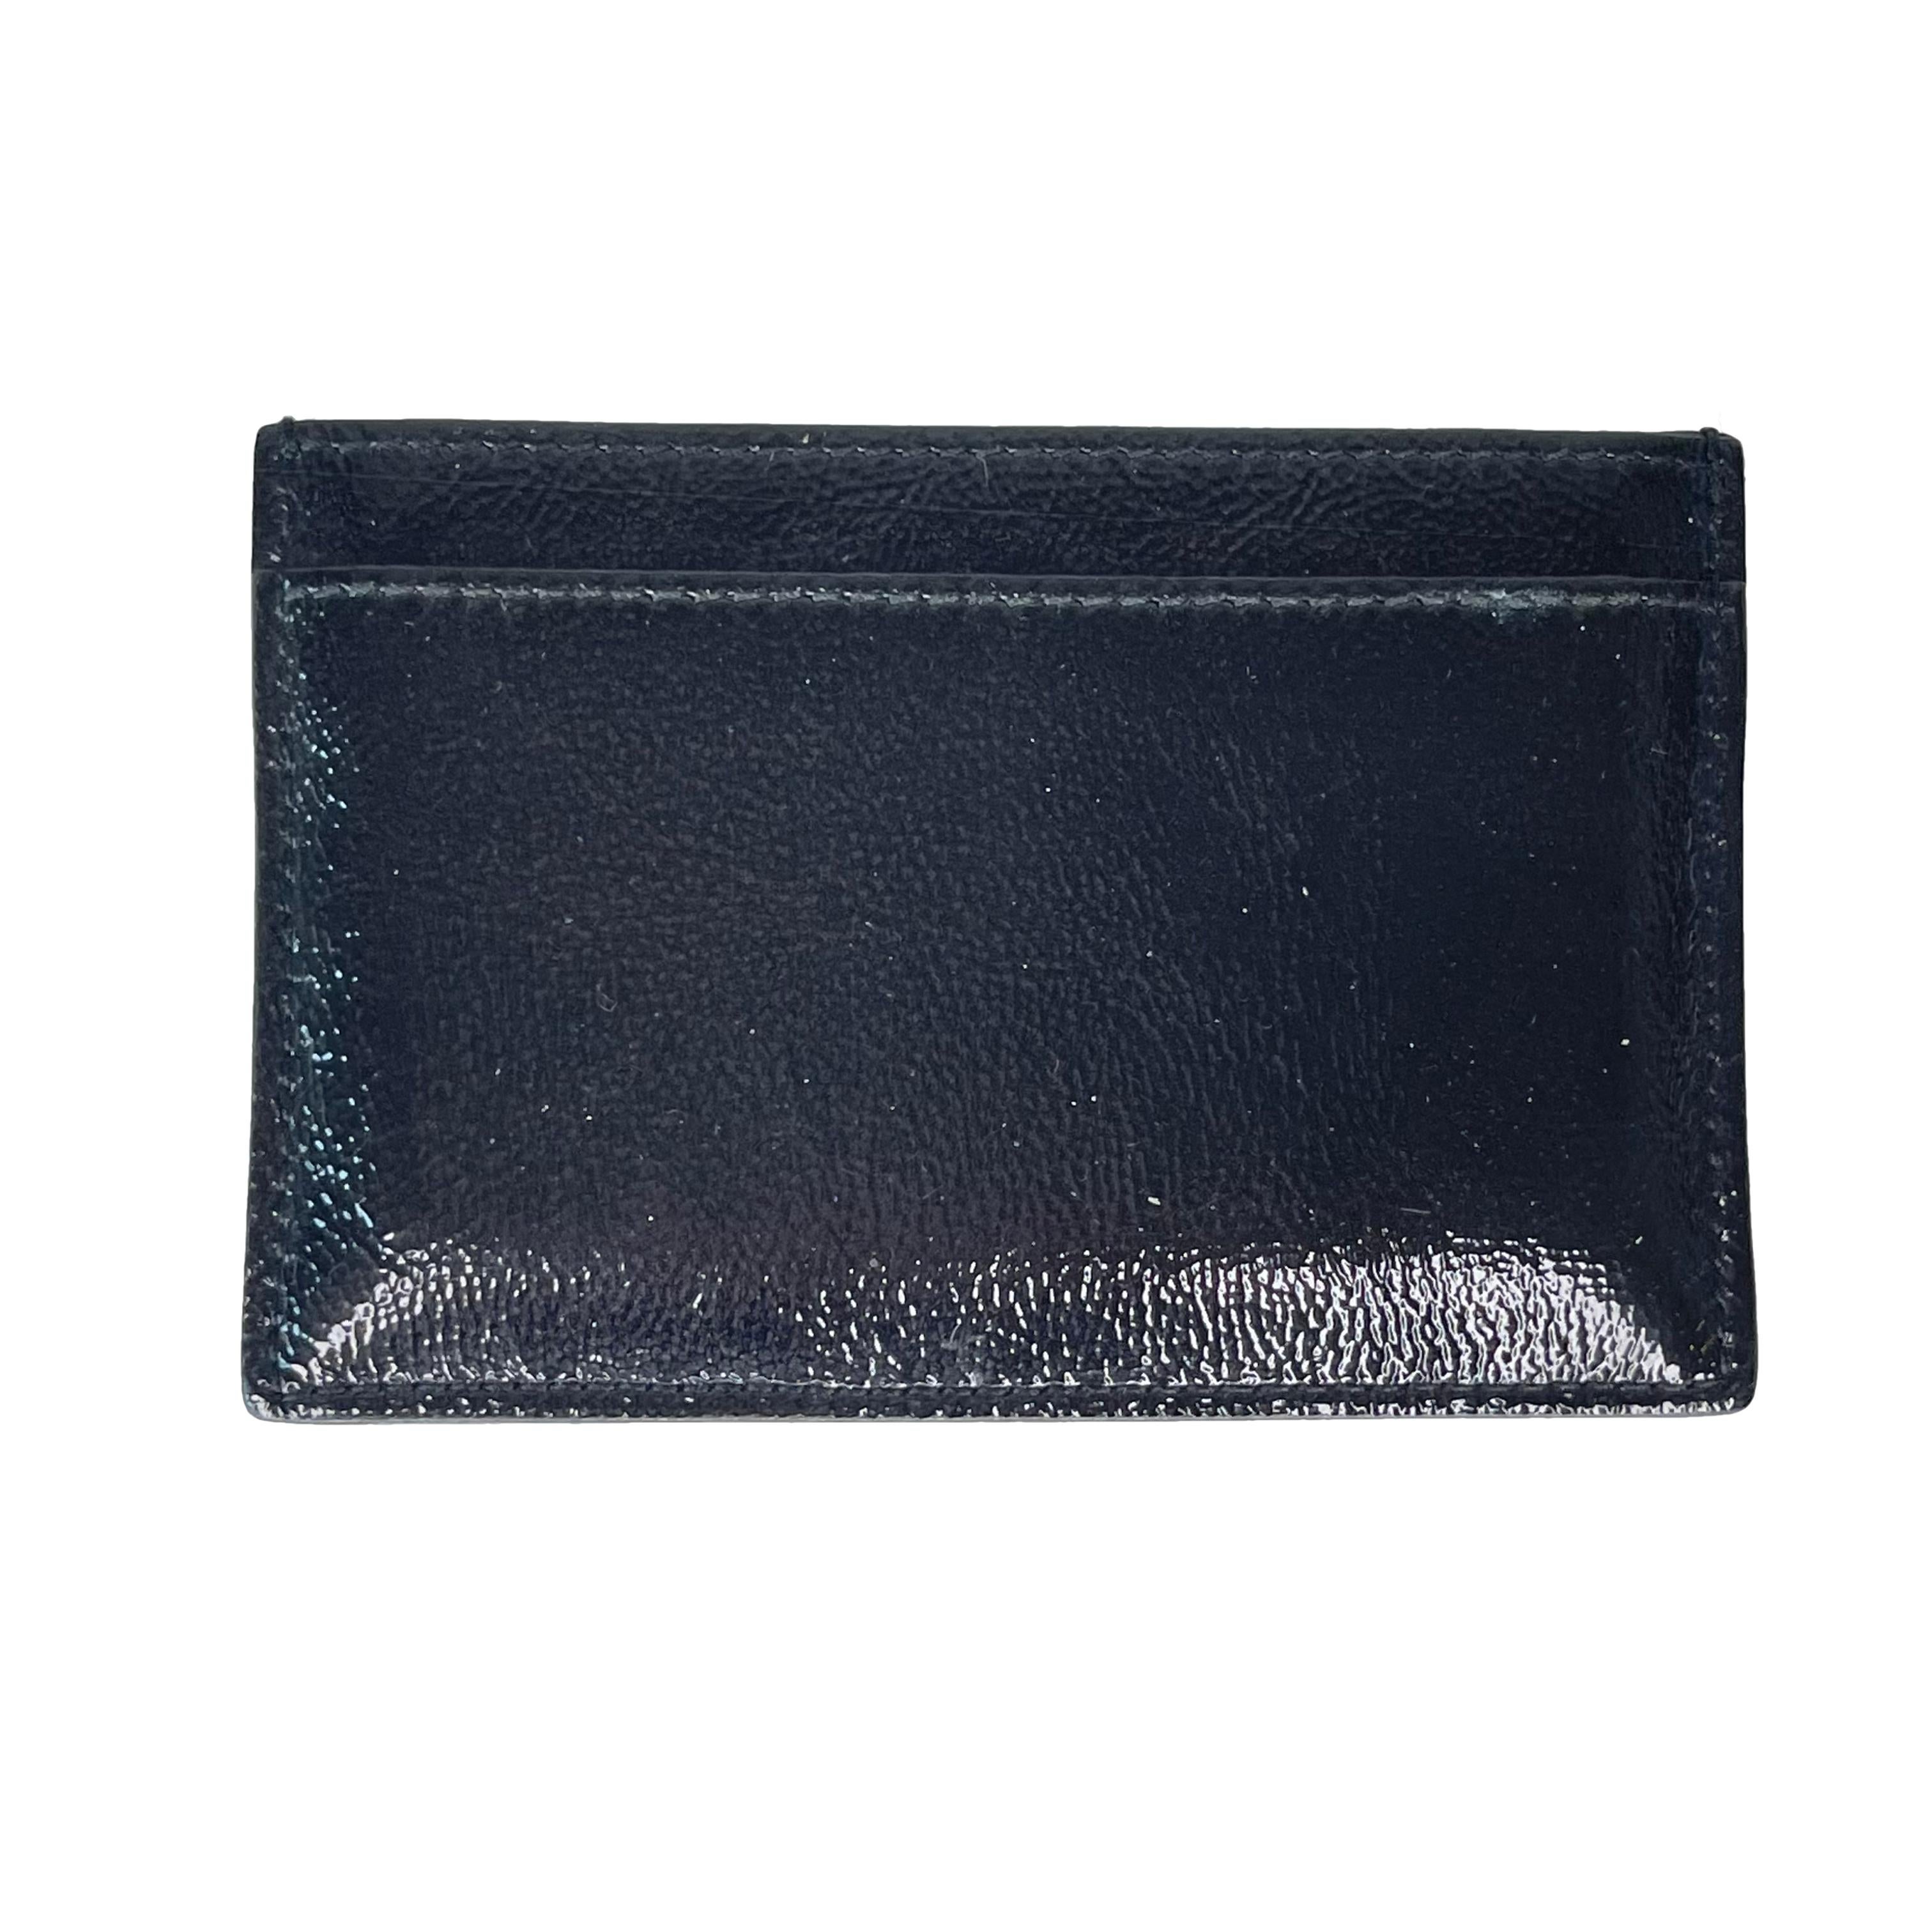 COLOR: Black
MATERIAL: Patent leather
ITEM CODE: 513092 211908
MEASURES: H 2” x L 3.5”
COMES WITH: Box and card card
CONDITION: Excellent - wallet is pristine.

Made in Italy